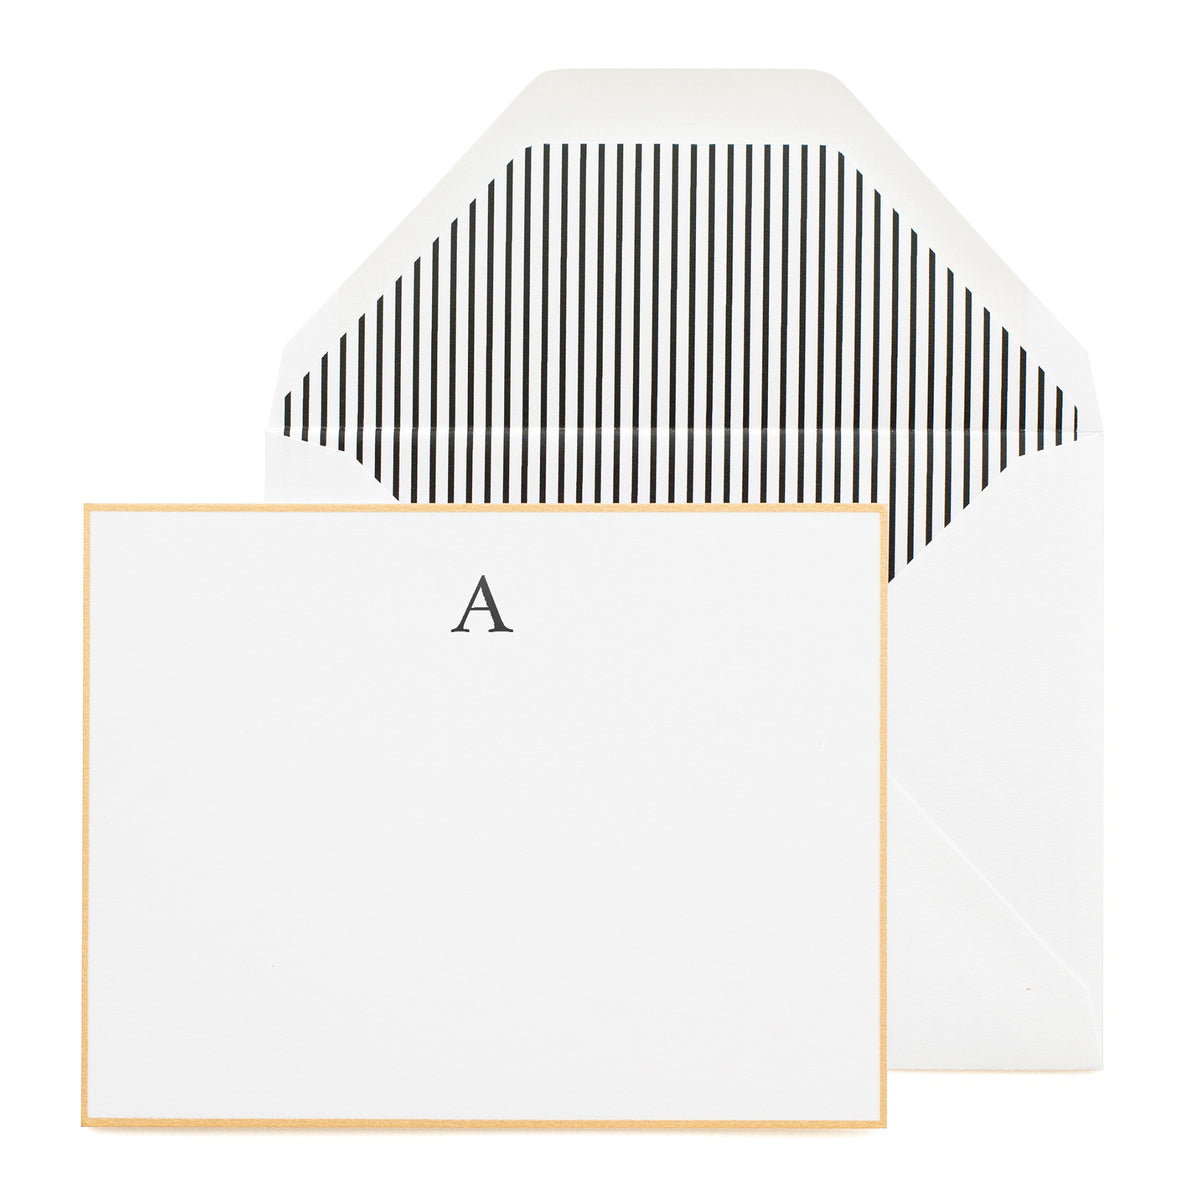 Gold Bordered Flat Note Card with Black Monogram Initial.